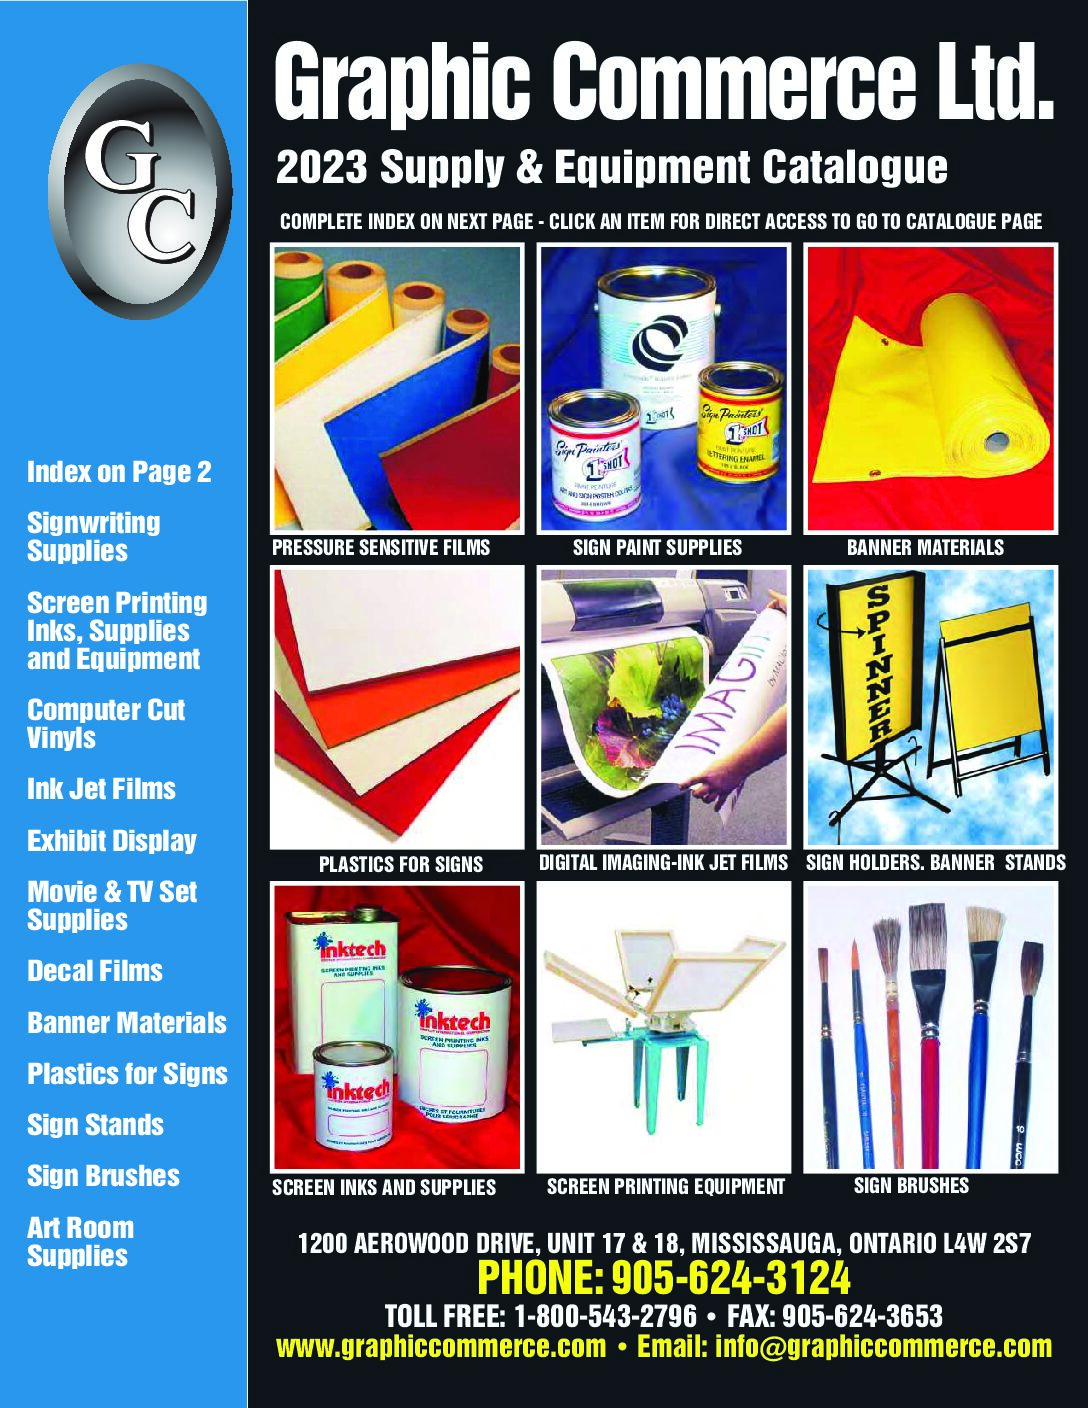 1 current catalog with links pdf - "SEAL-ACCO" Brand Products